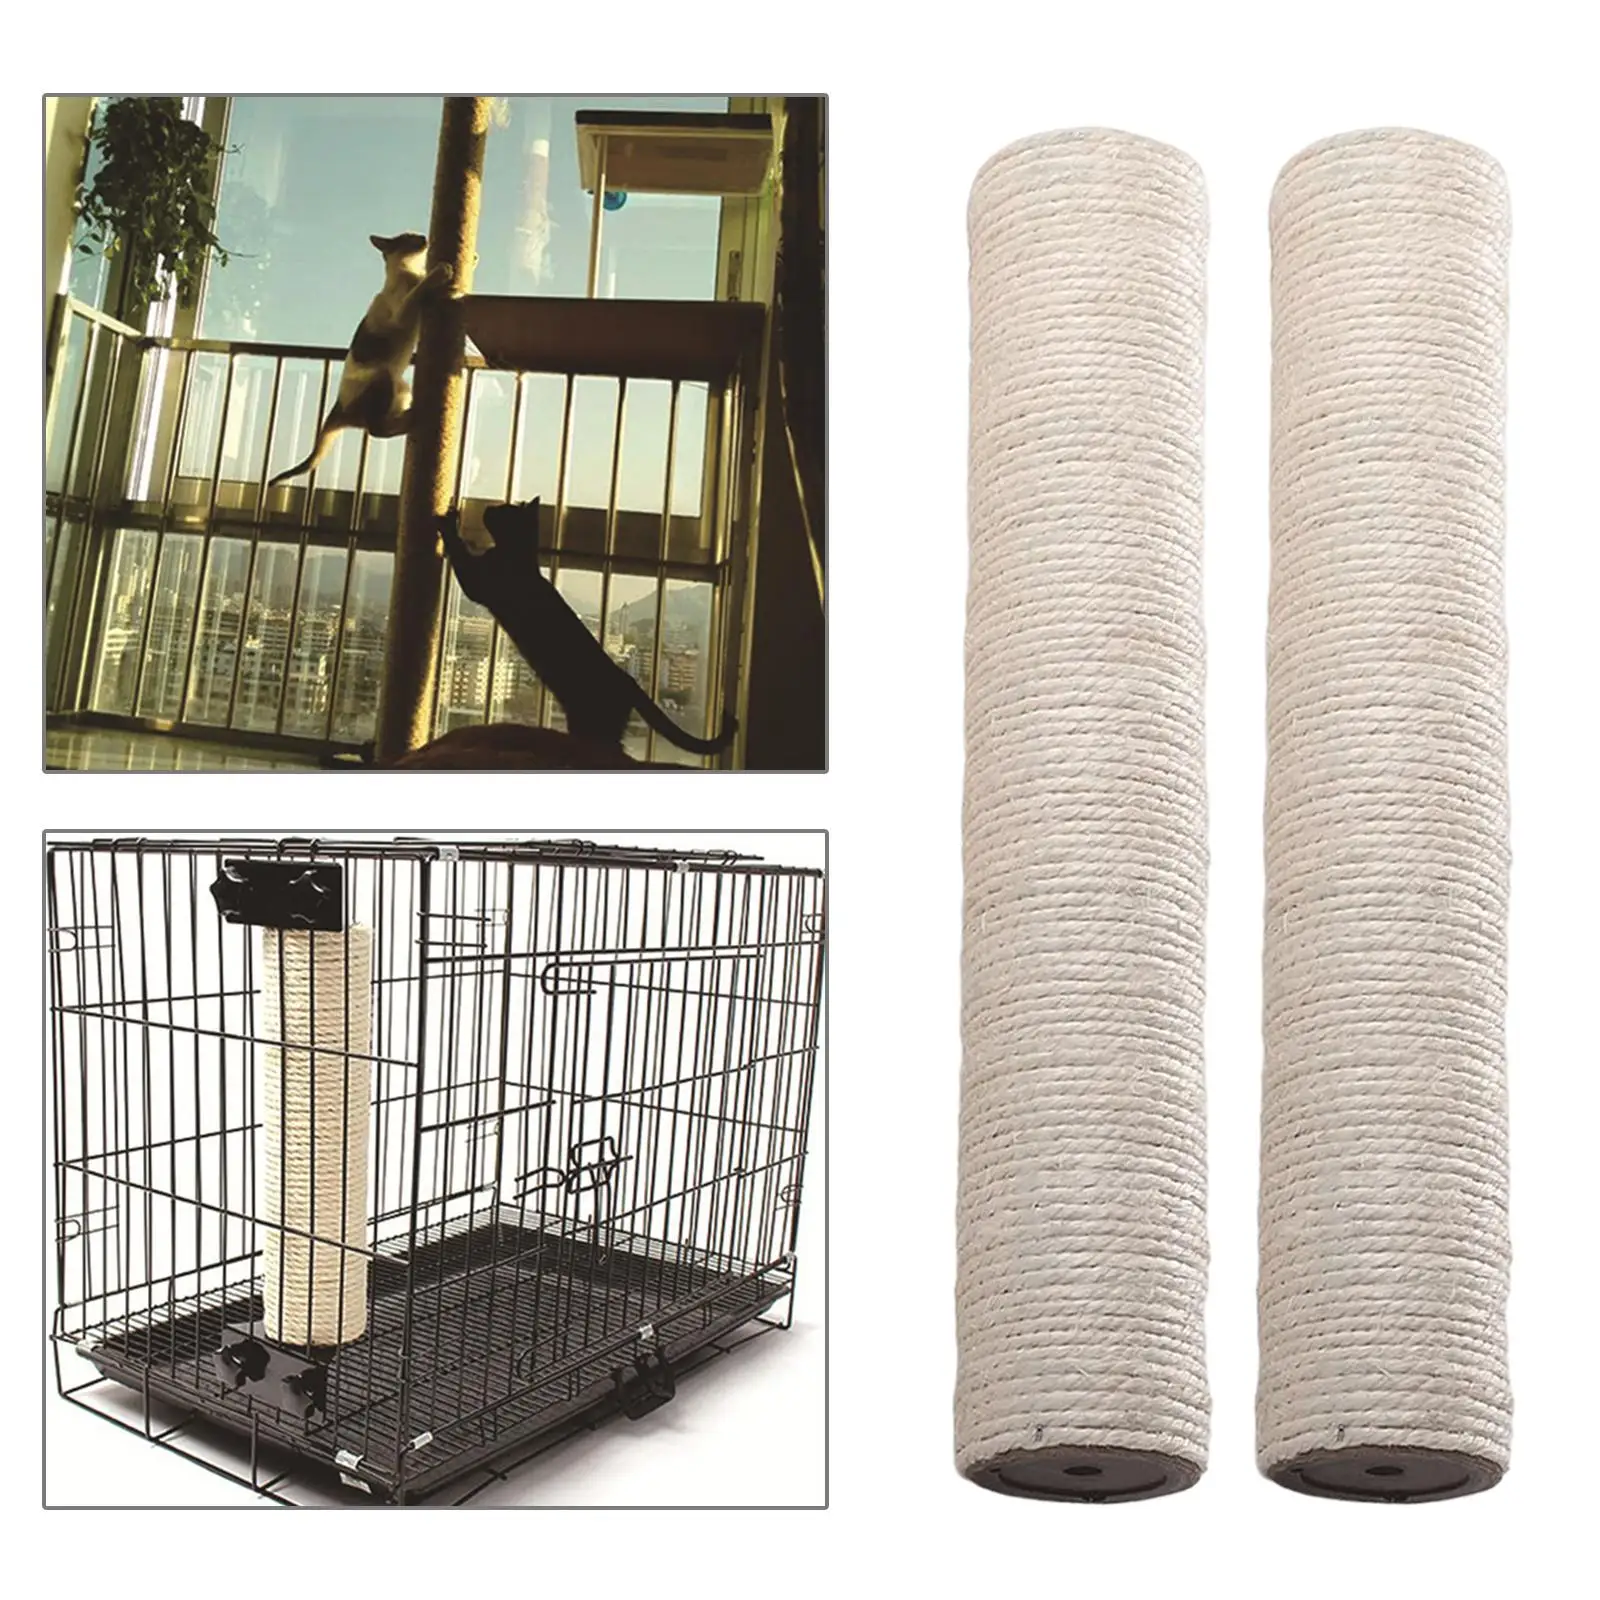 Cotton Rope Scratching Post Replacement Parts Dia 7cm Interactive Toy Scratch Posts Refills for Pet Cats Kitten